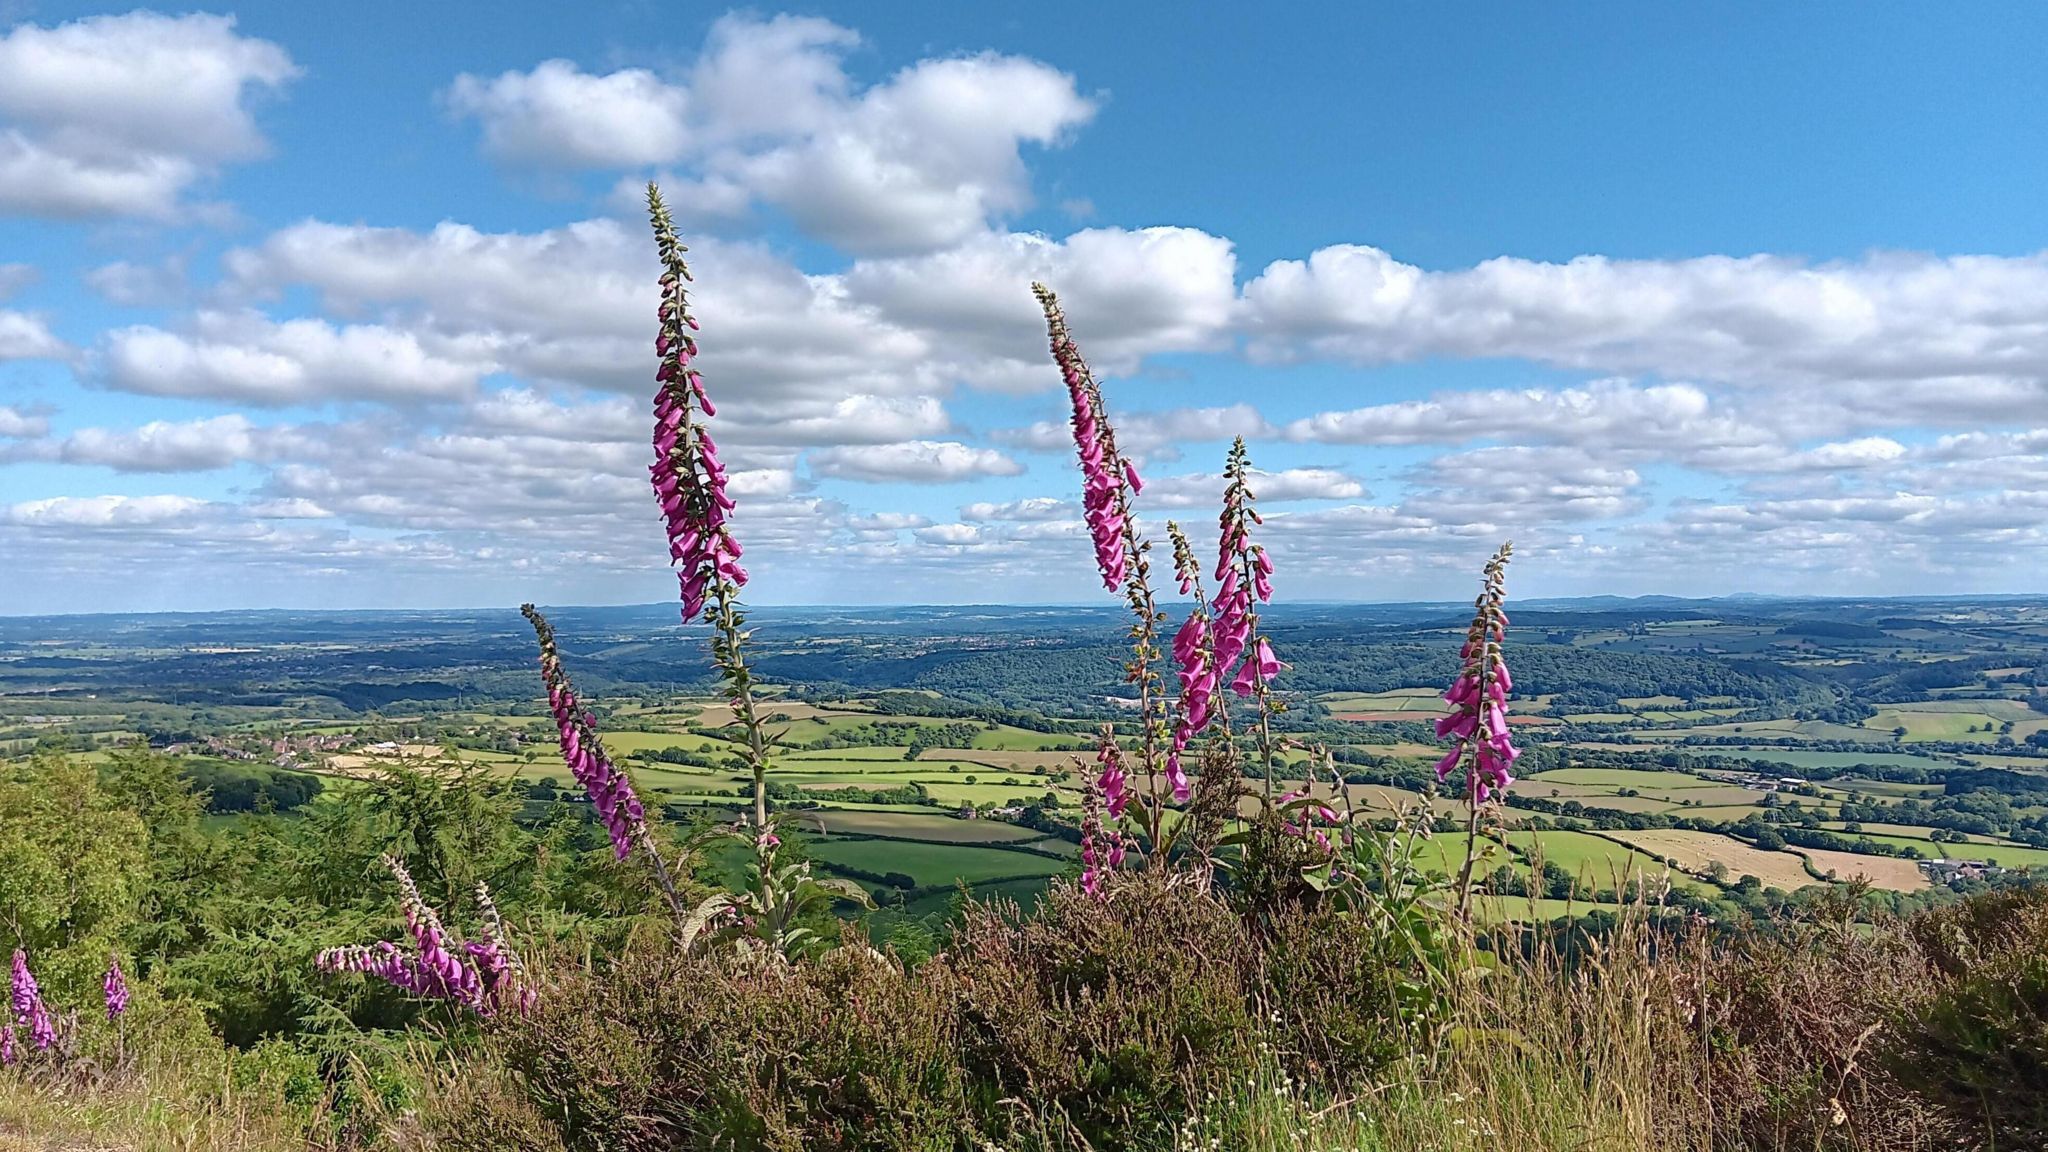 Foxgloves on The Wrekin hill in Shropshire. About a dozen of them with opened pink flowers can be seen in front of a vista showing green fields in the distance